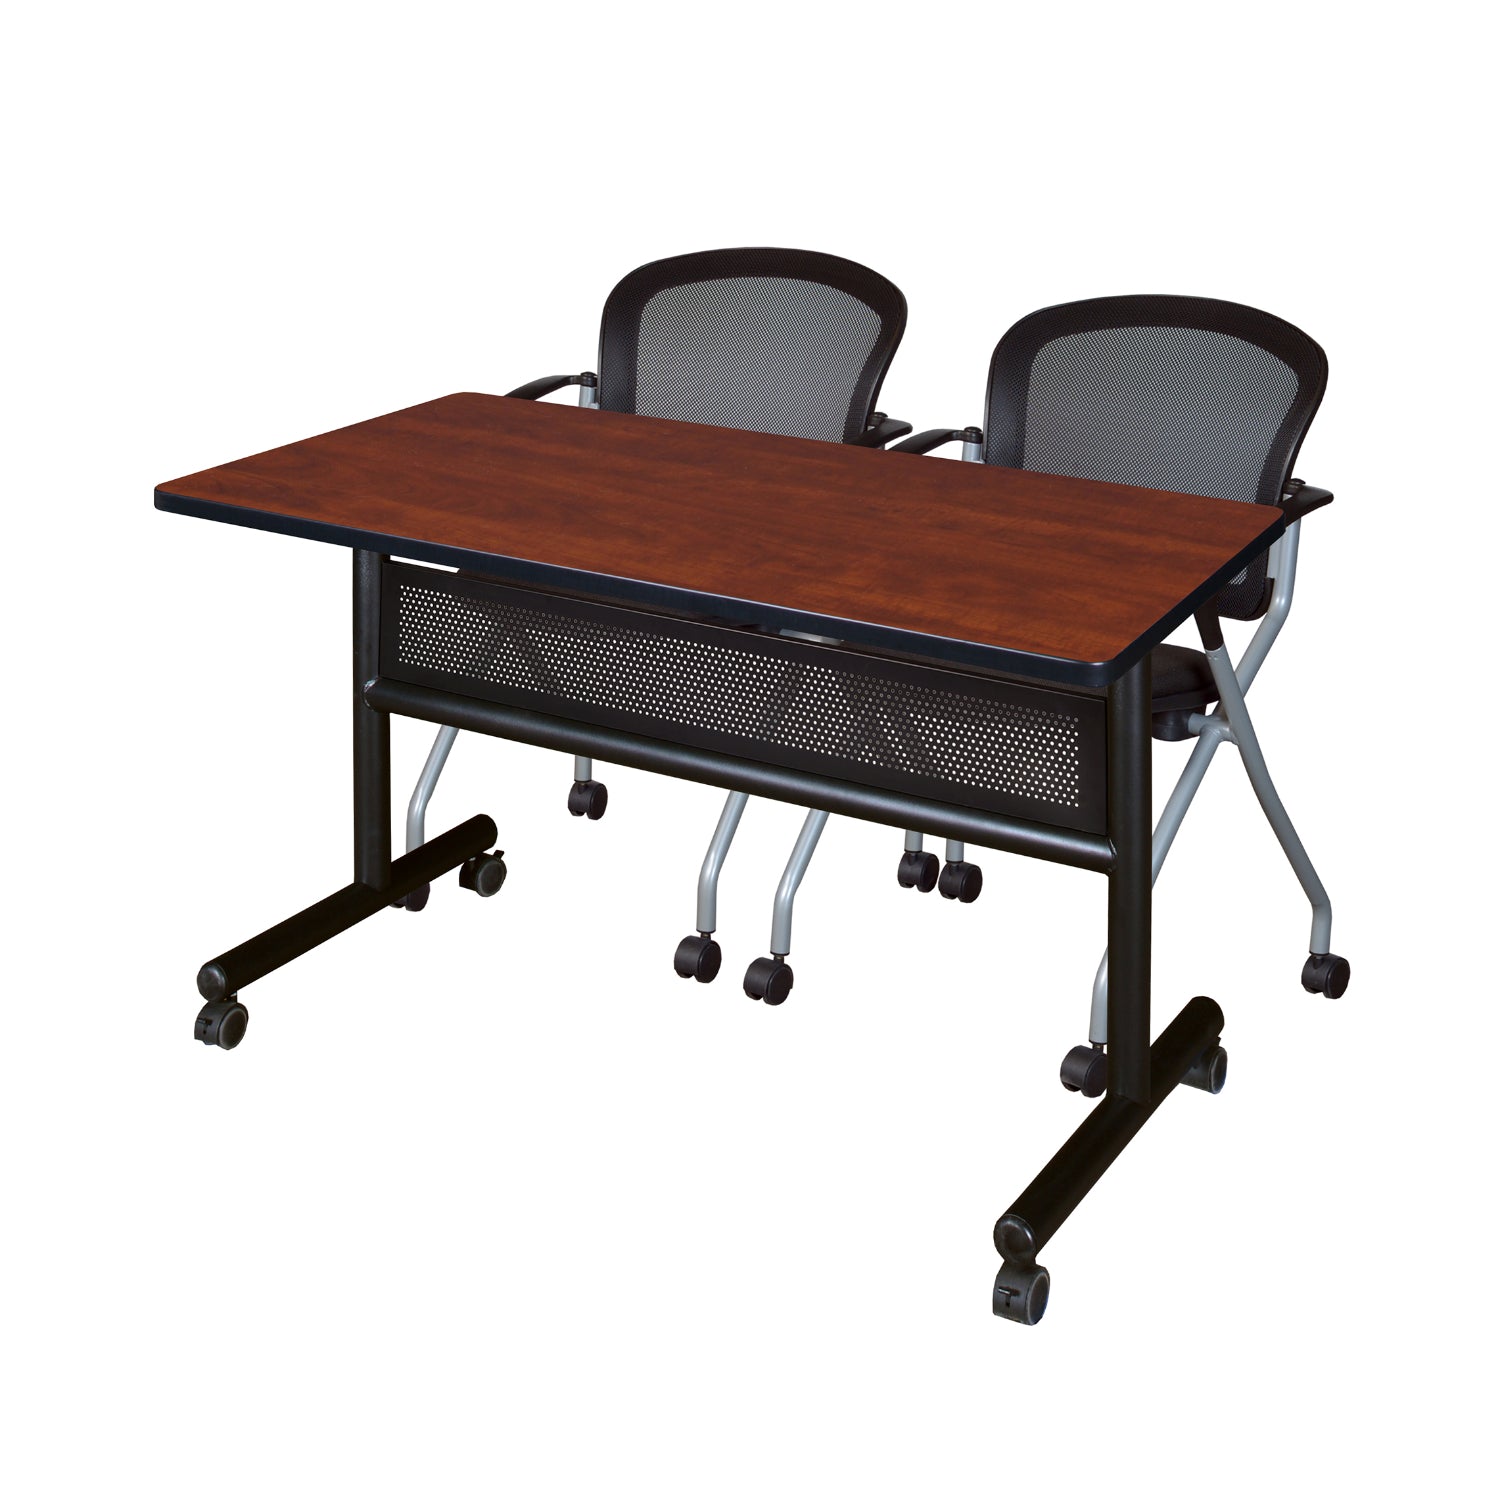 Kobe Flip Top Privacy Training Table and Chair Package, Kobe 48" x 24" Flip Top Mobile Nesting Table with Modesty Panel and 2 Cadence Nesting Chairs